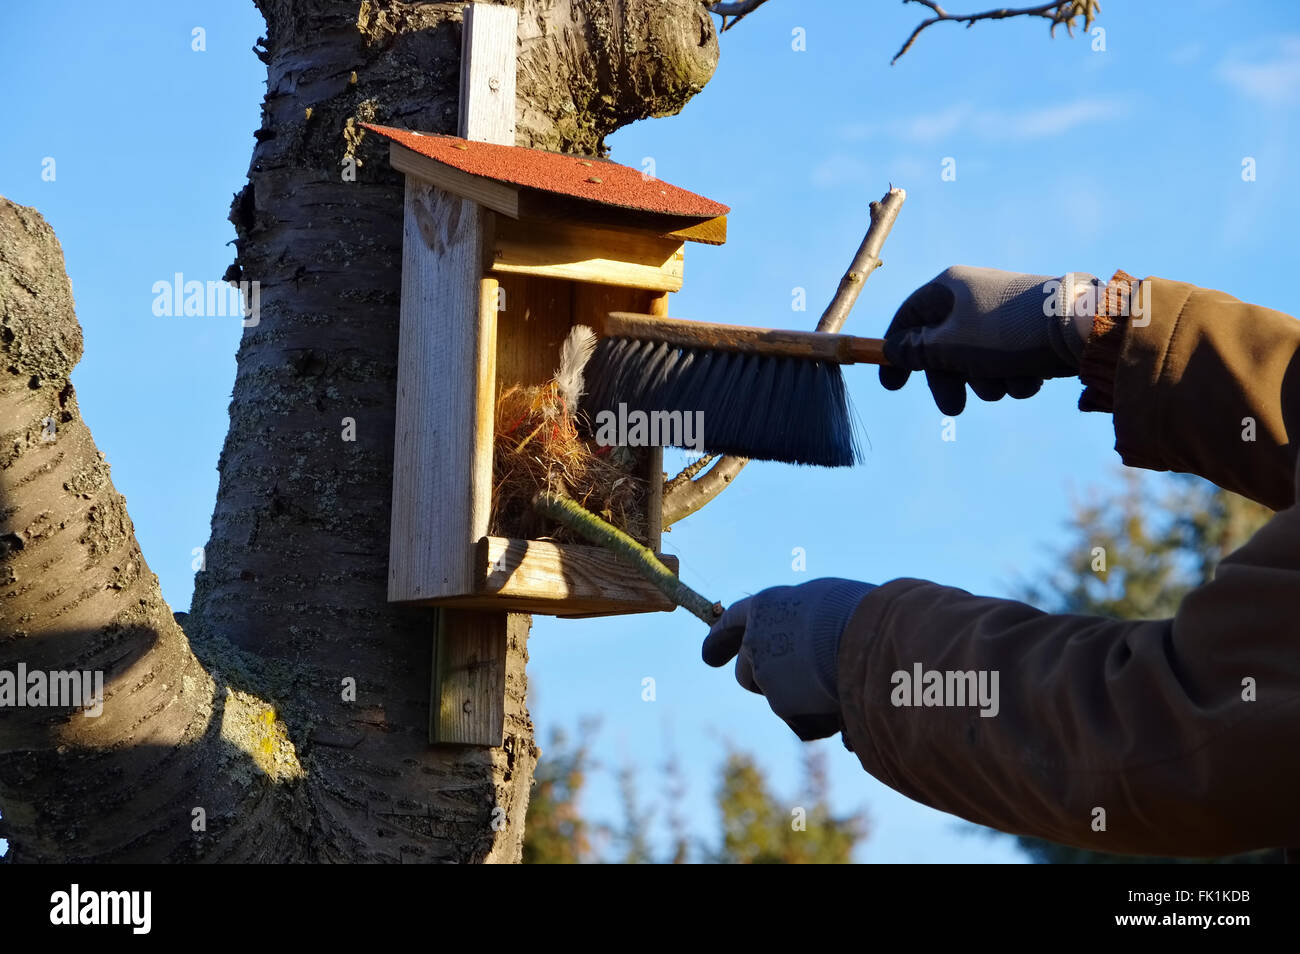 Nistkasten saeubern - cleaning the nest box in spring Stock Photo